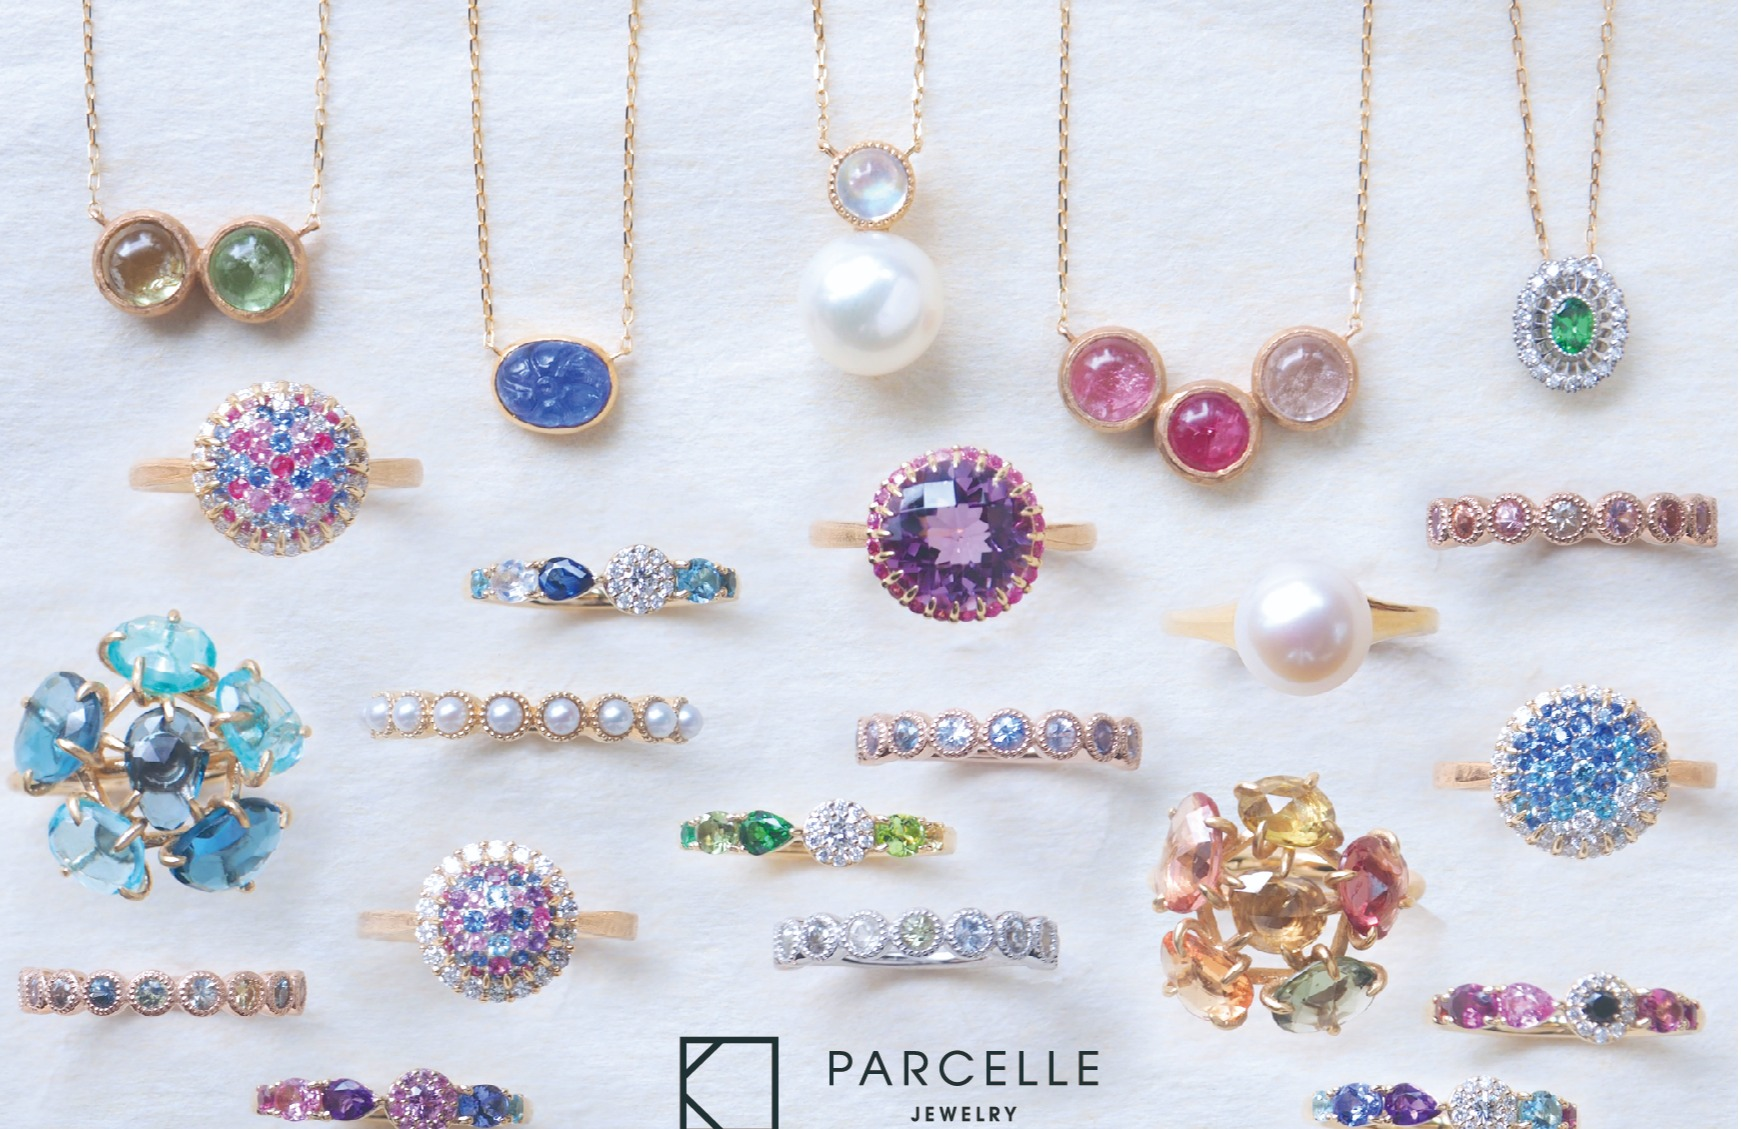 PARCELLE　JEWELRY　夏の新作ジュエリーとカスタムジュエリーフェア